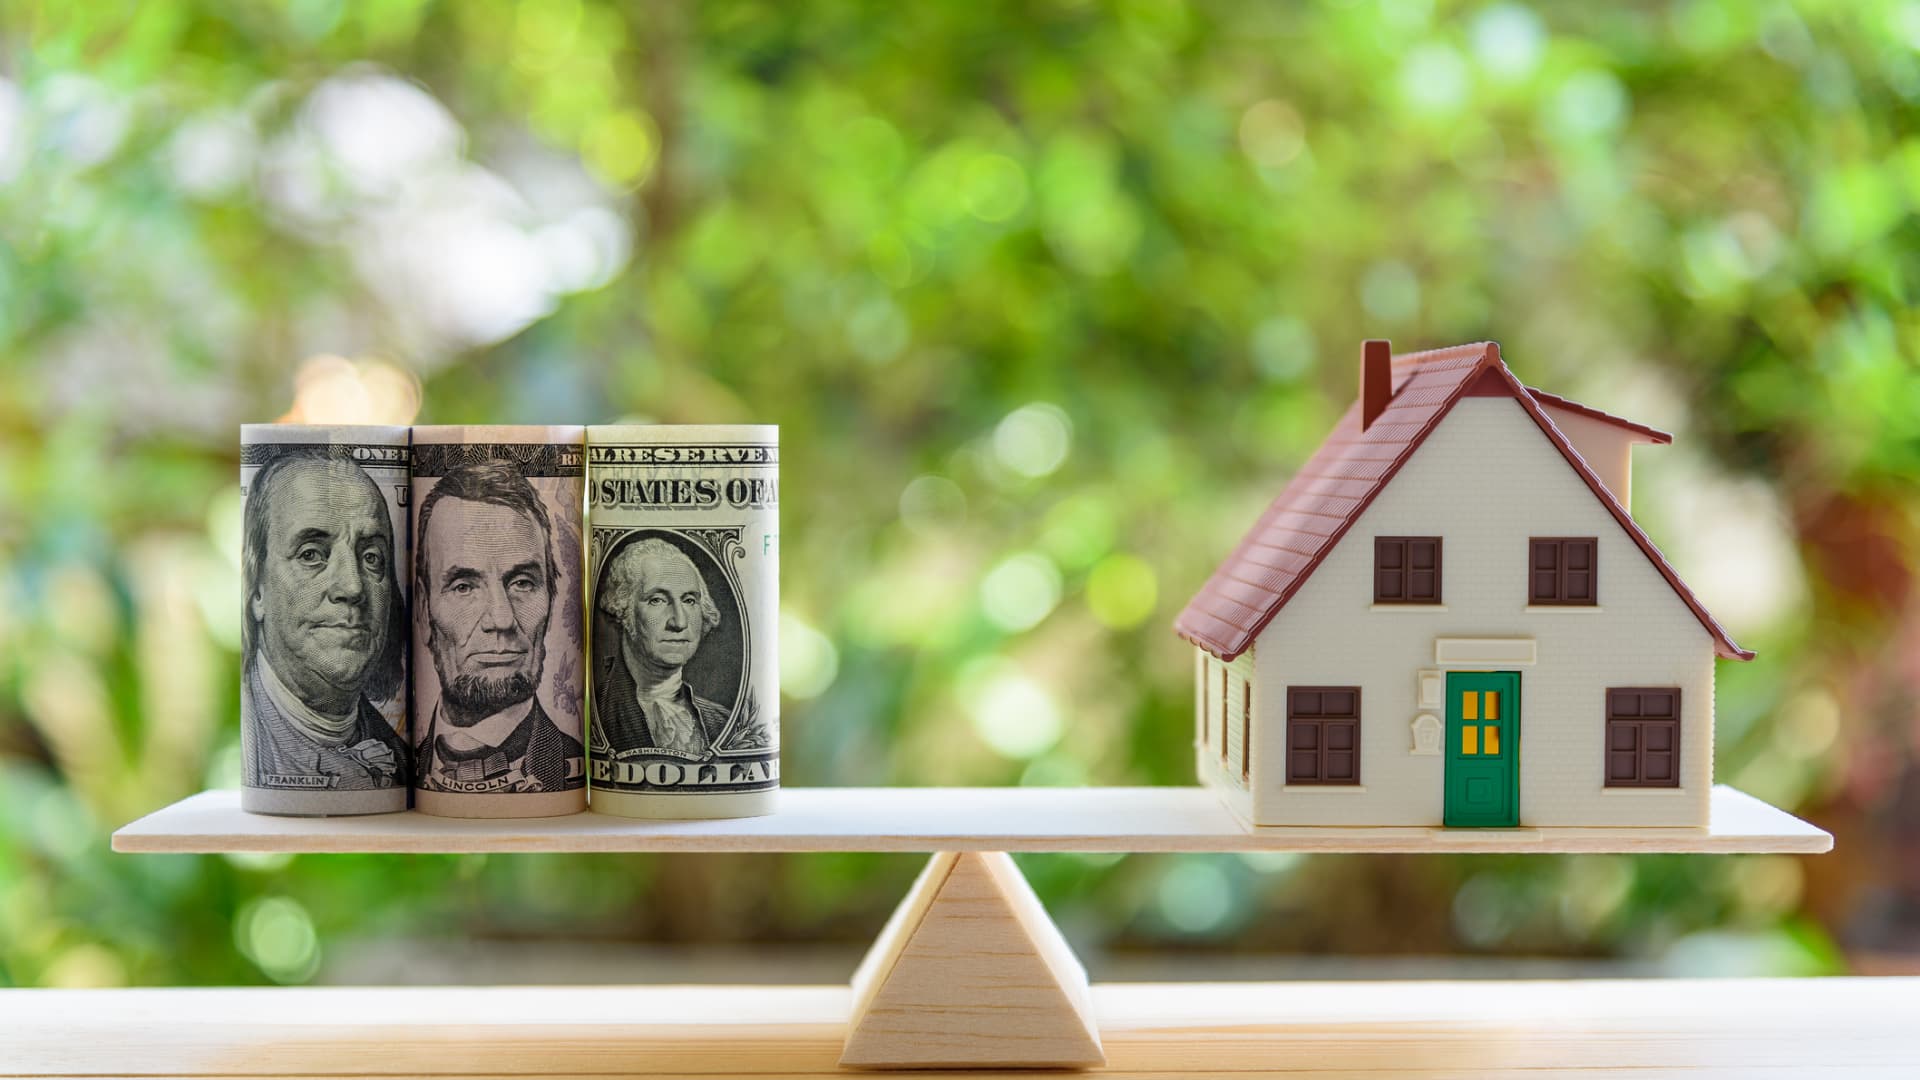 Here’s what you need to know about reverse mortgages